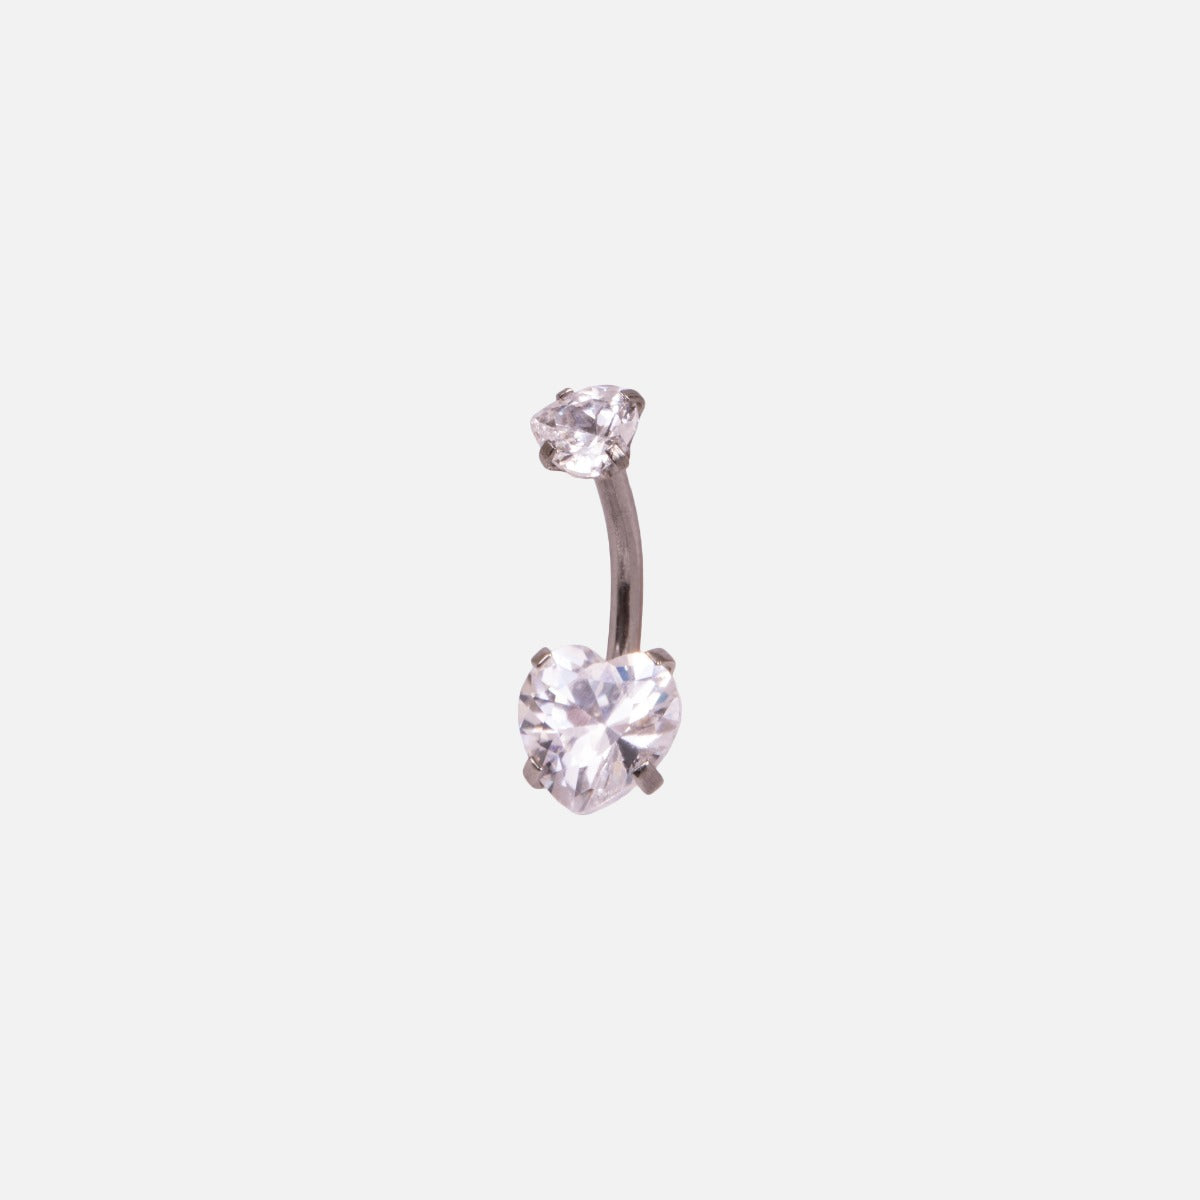 Stainless steel belly button ring with heart cubic zirconia